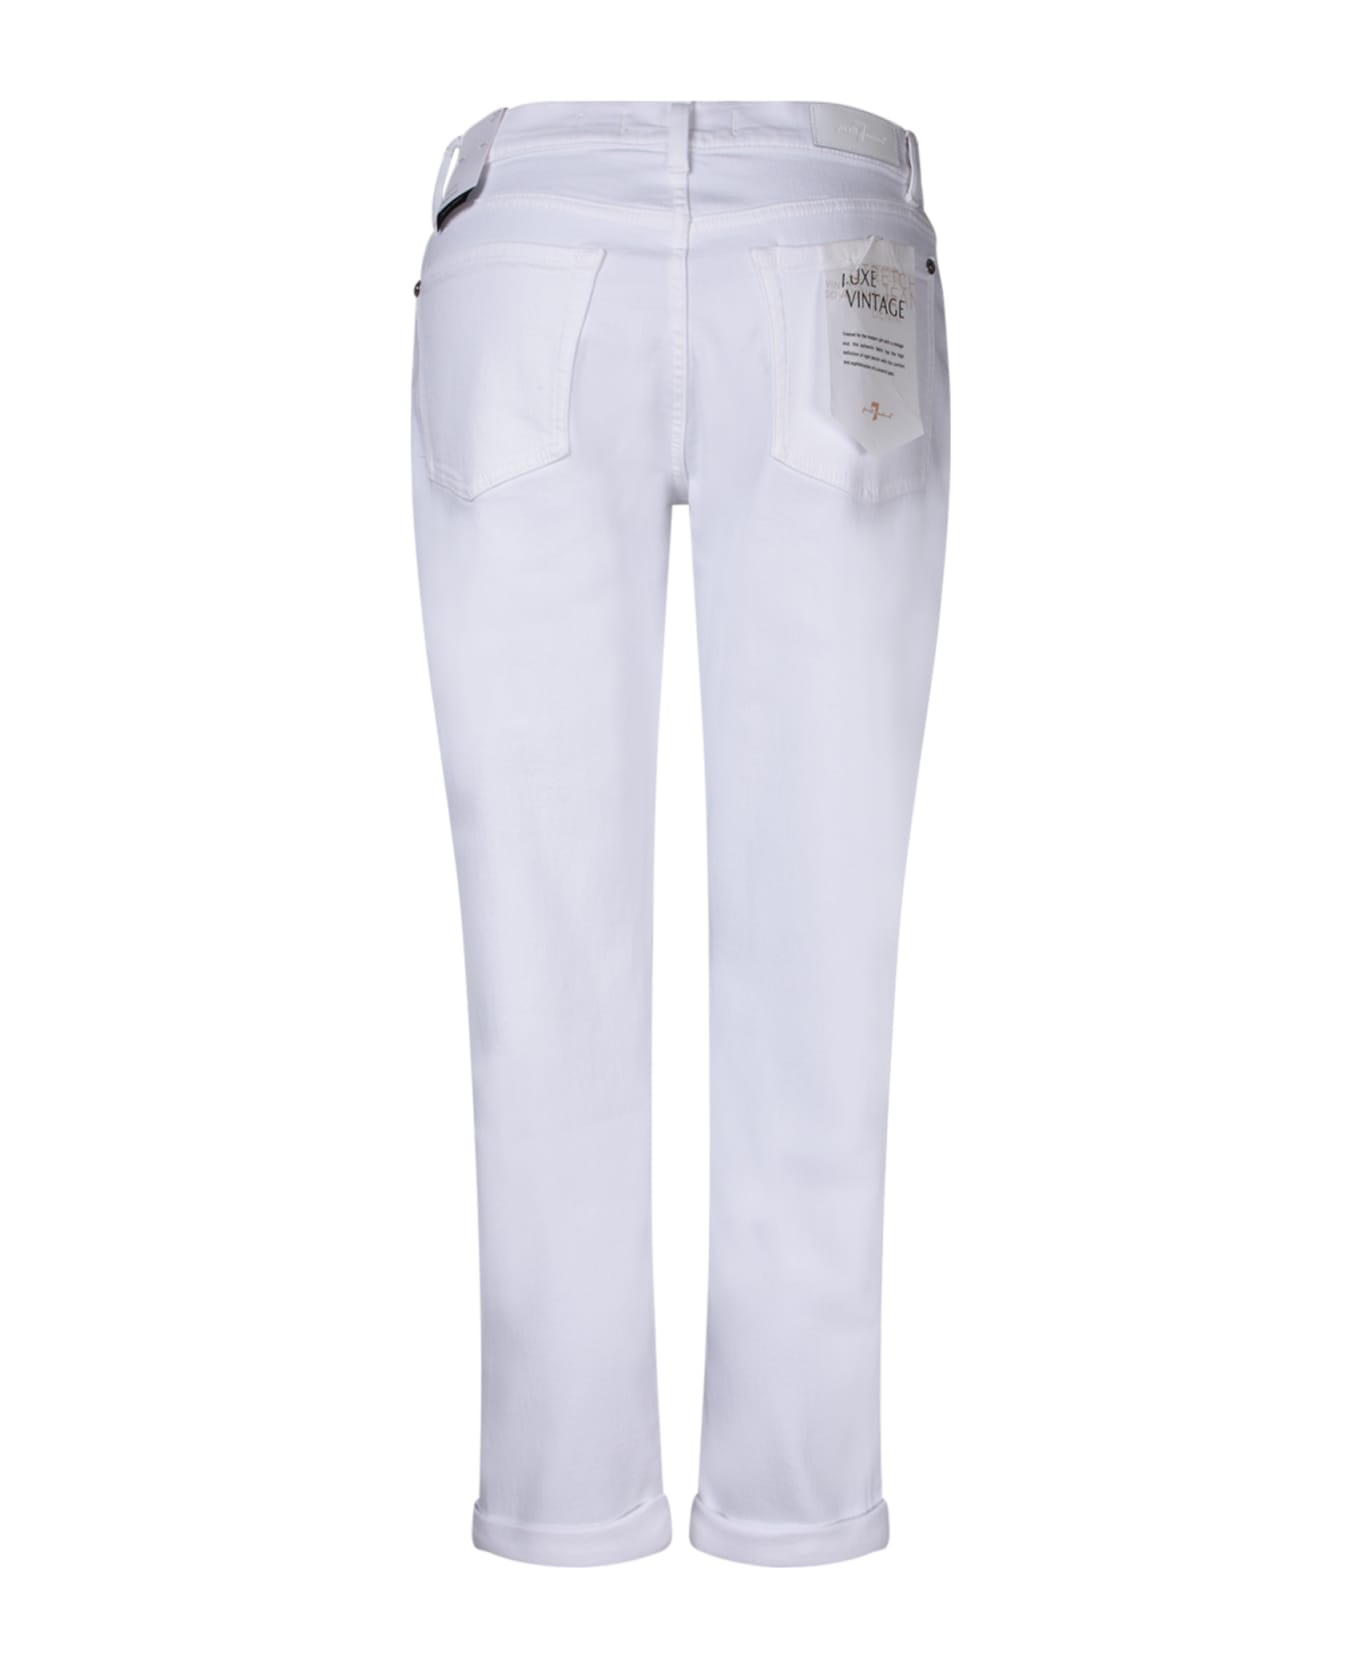 7 For All Mankind Josefina White Jeans By 7 For All Mankind - White デニム